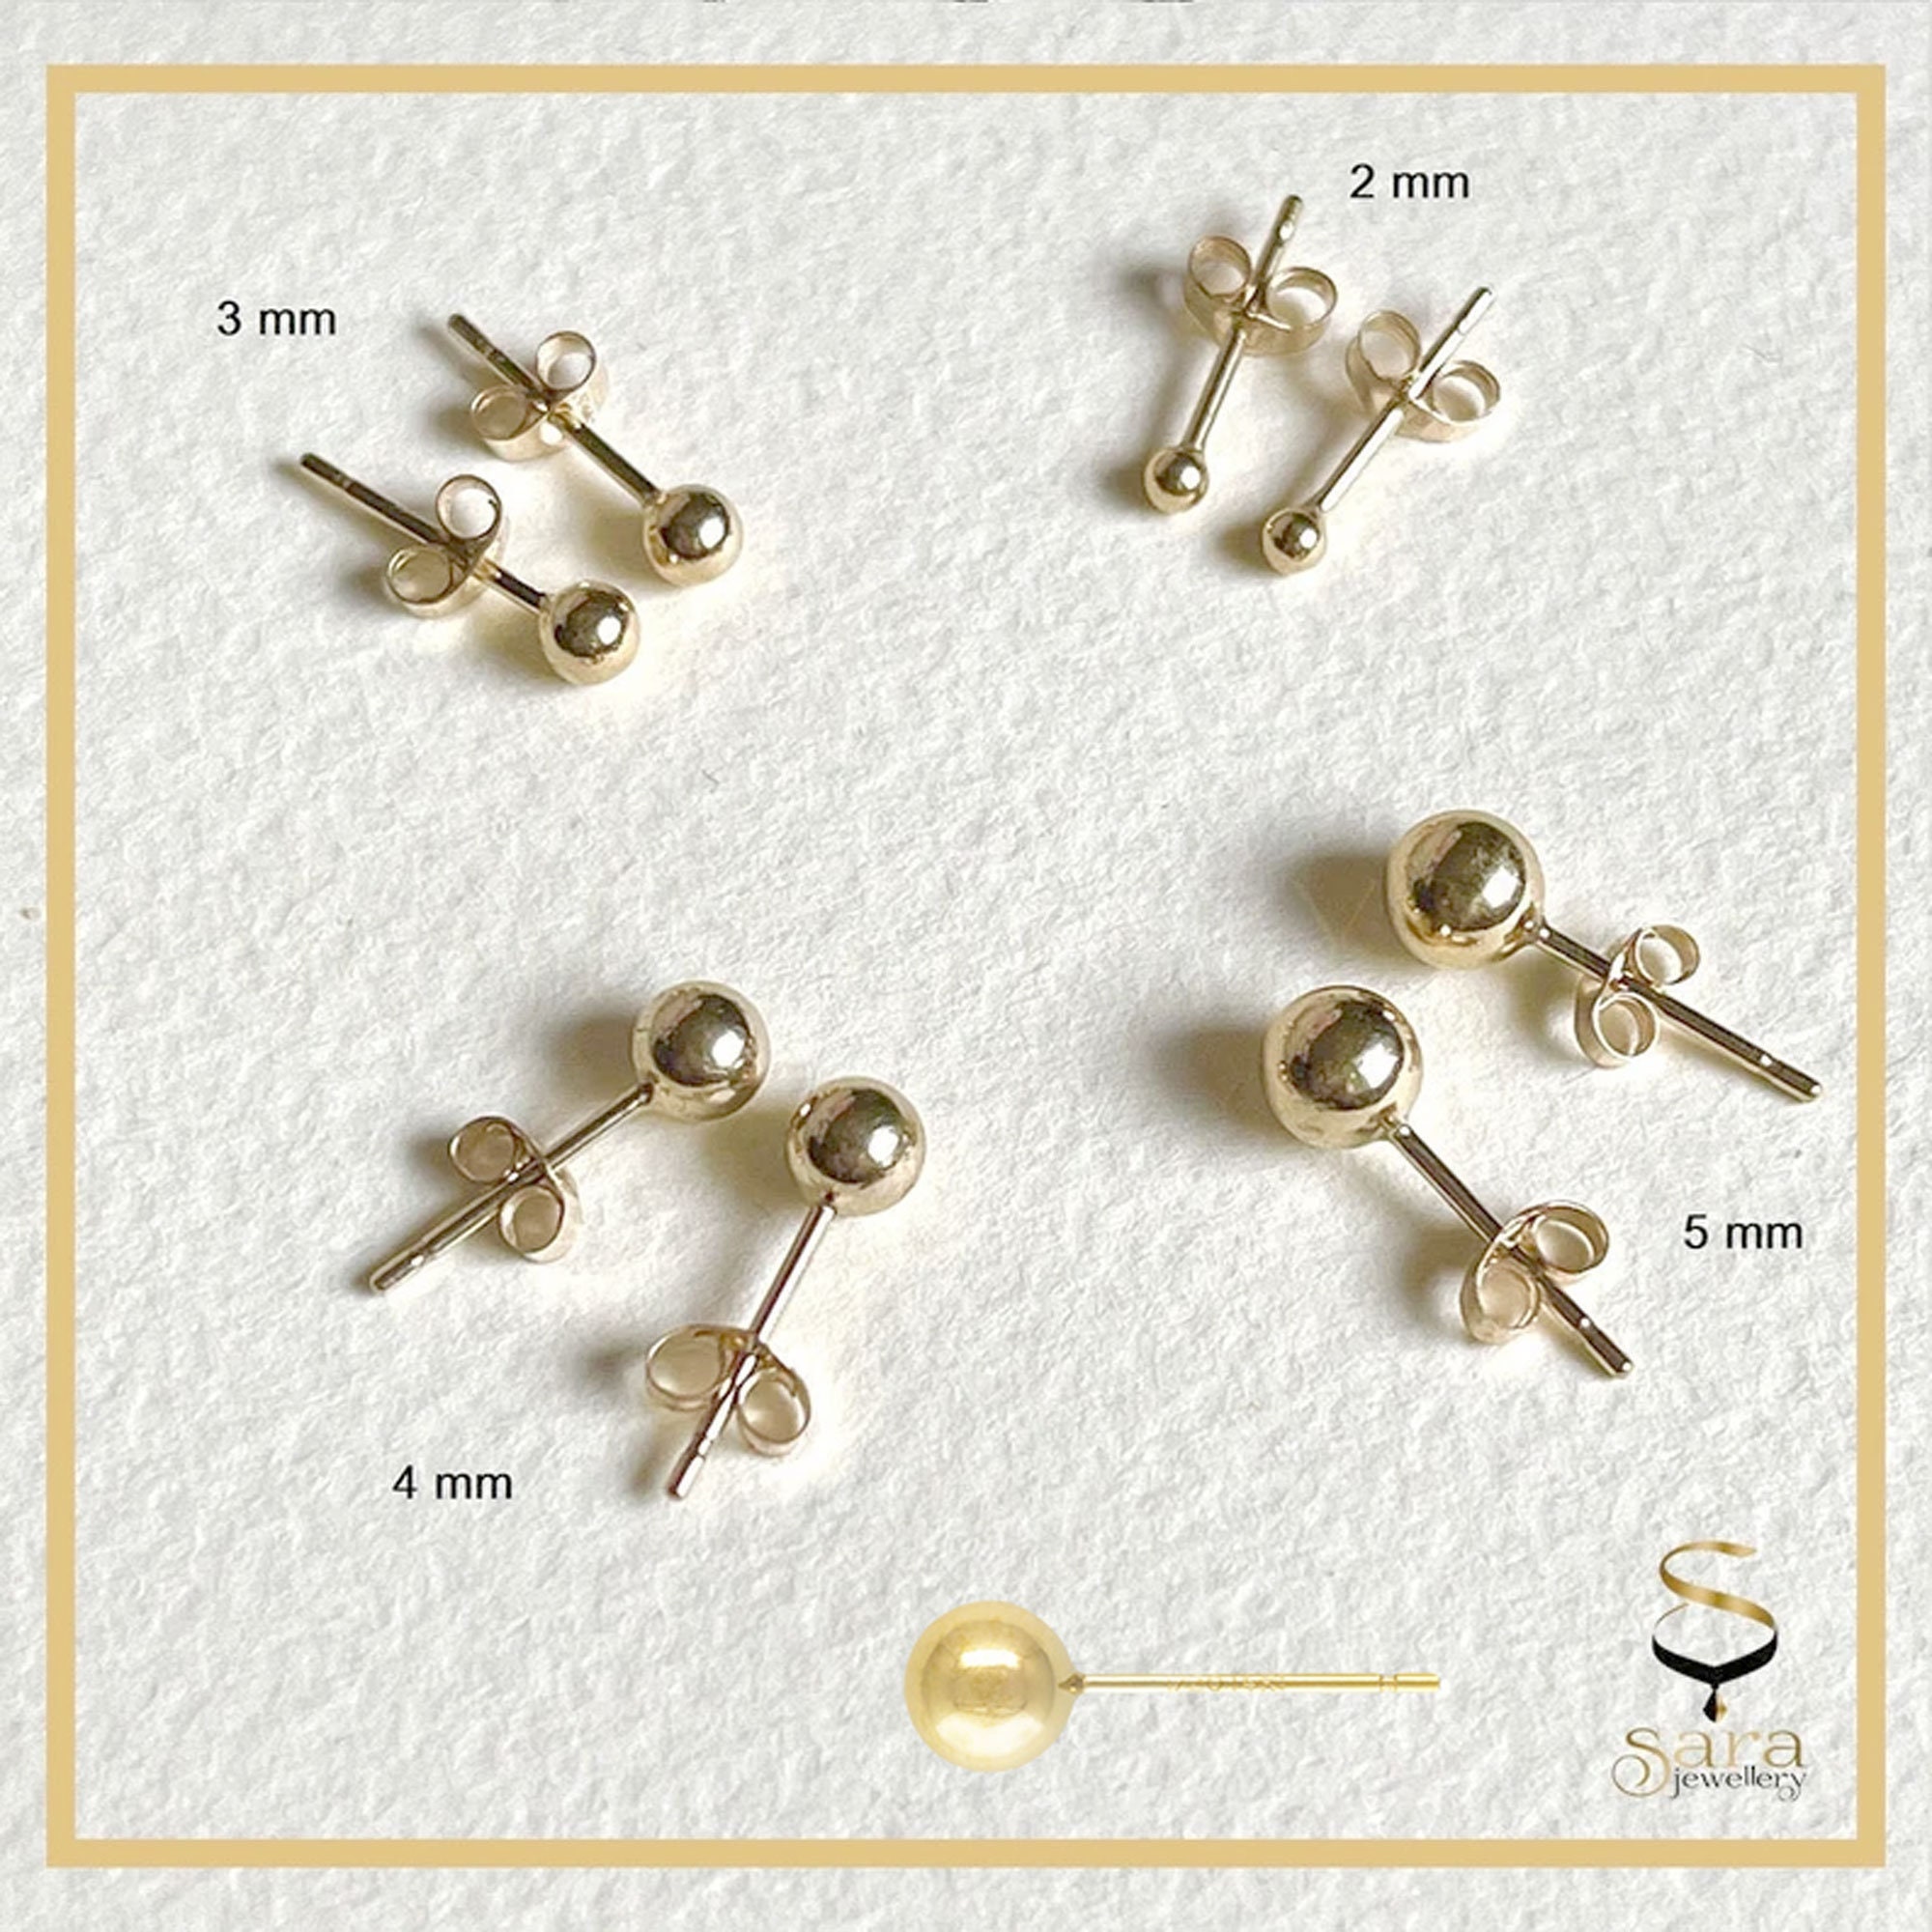 14K Yellow Gold Filled Round Ball Stud Earrings 100%tarnish Resistant From  2mm, 3mm, 4mm,5mm Kids Genuine Gold Ball, Hypoallergenic Earring - Etsy  Israel